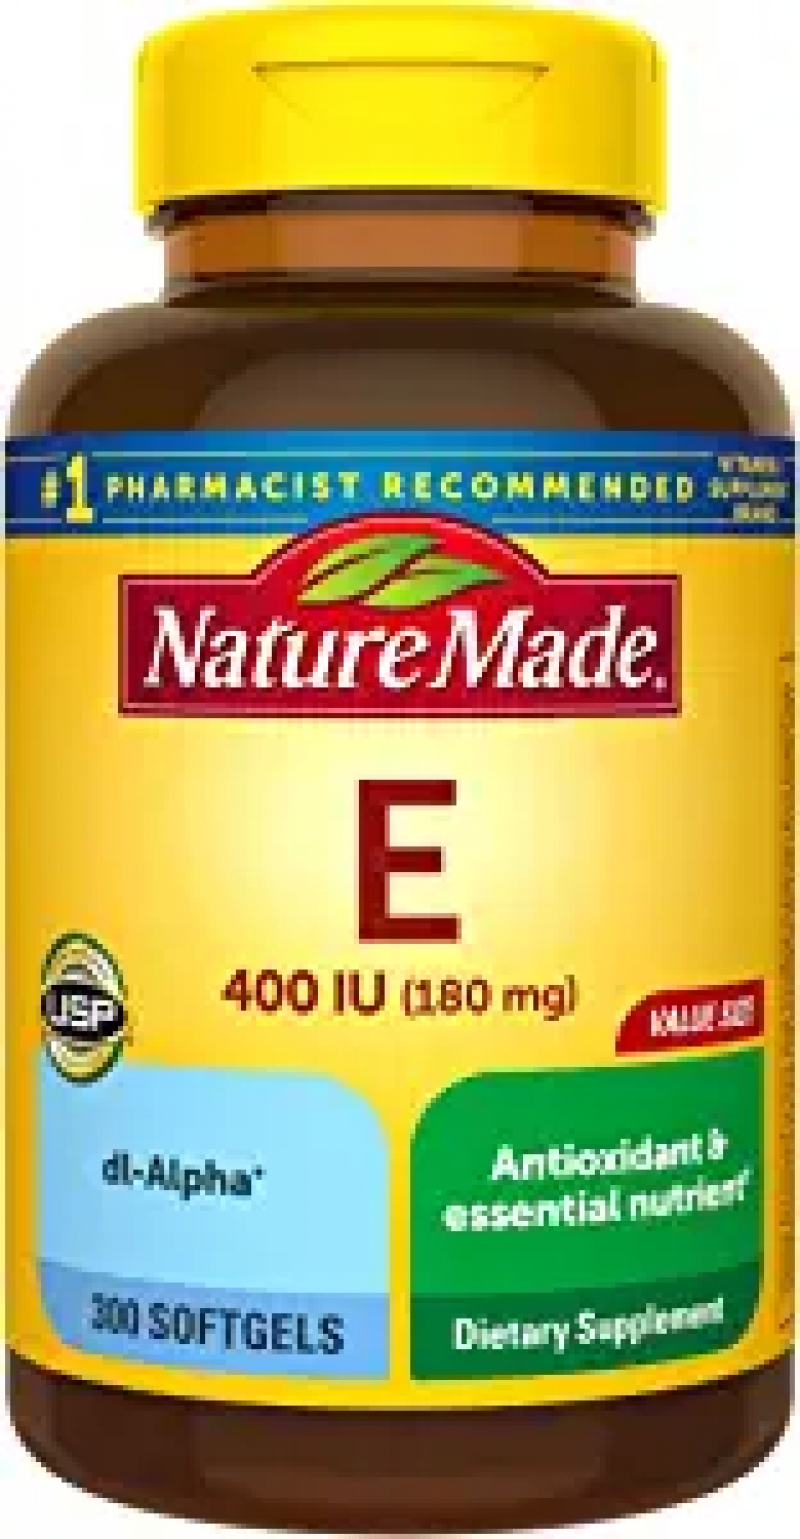 ihocon: Nature Made Vitamin E 180 mg (400 IU) dl-Alpha, Dietary Supplement for Antioxidant Support維他命E, 300粒